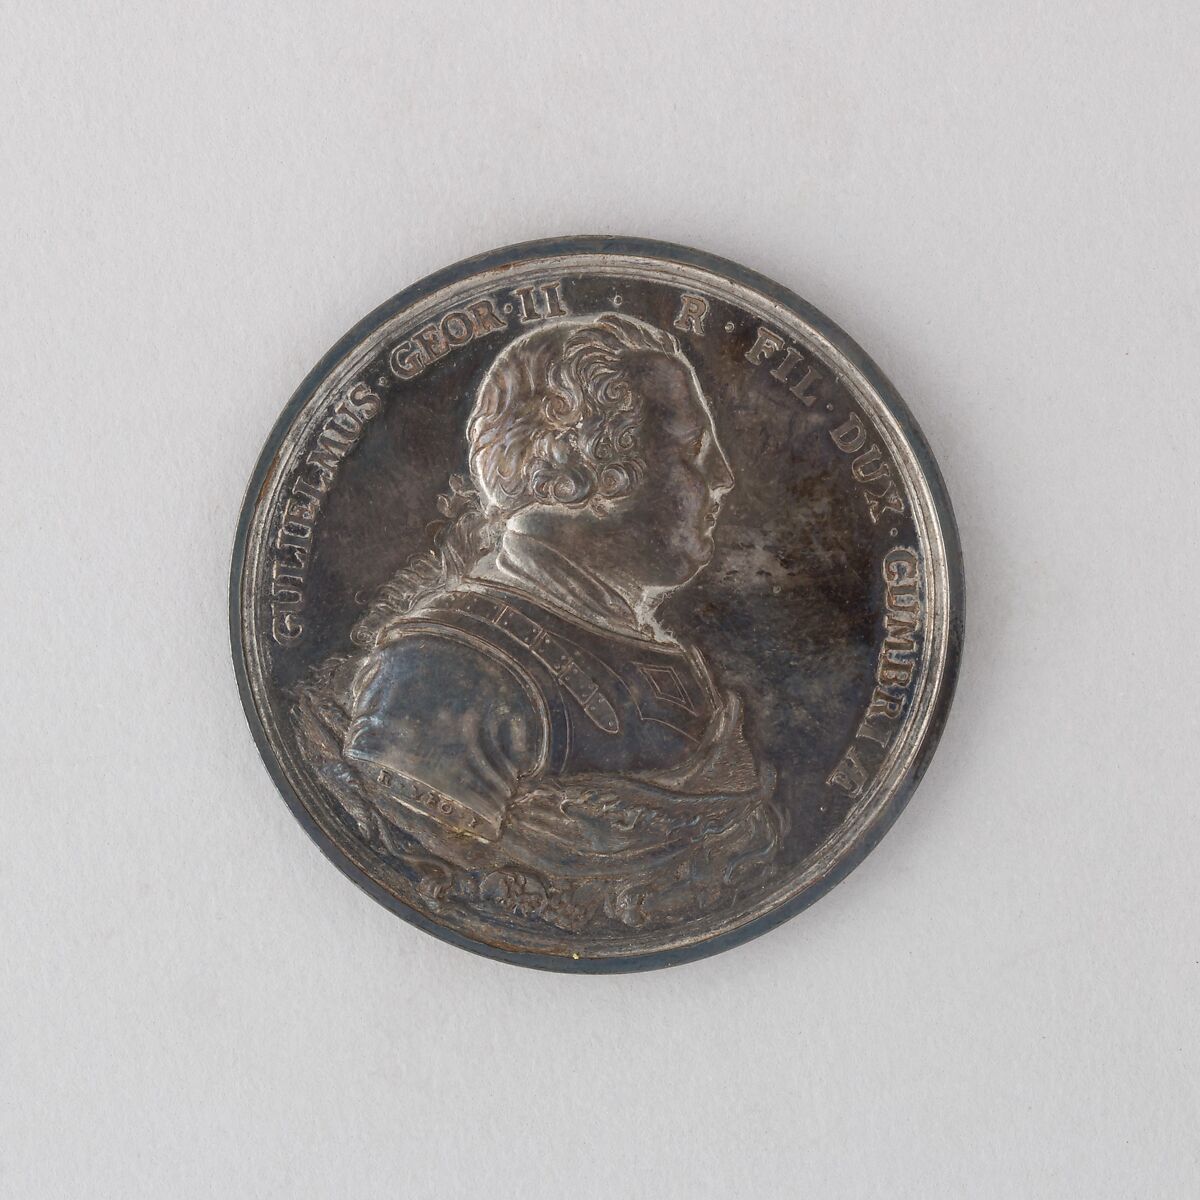 Medal Showing the Battle of Culloden and William Duke of Cumberland, Son of George II, Silver, British 